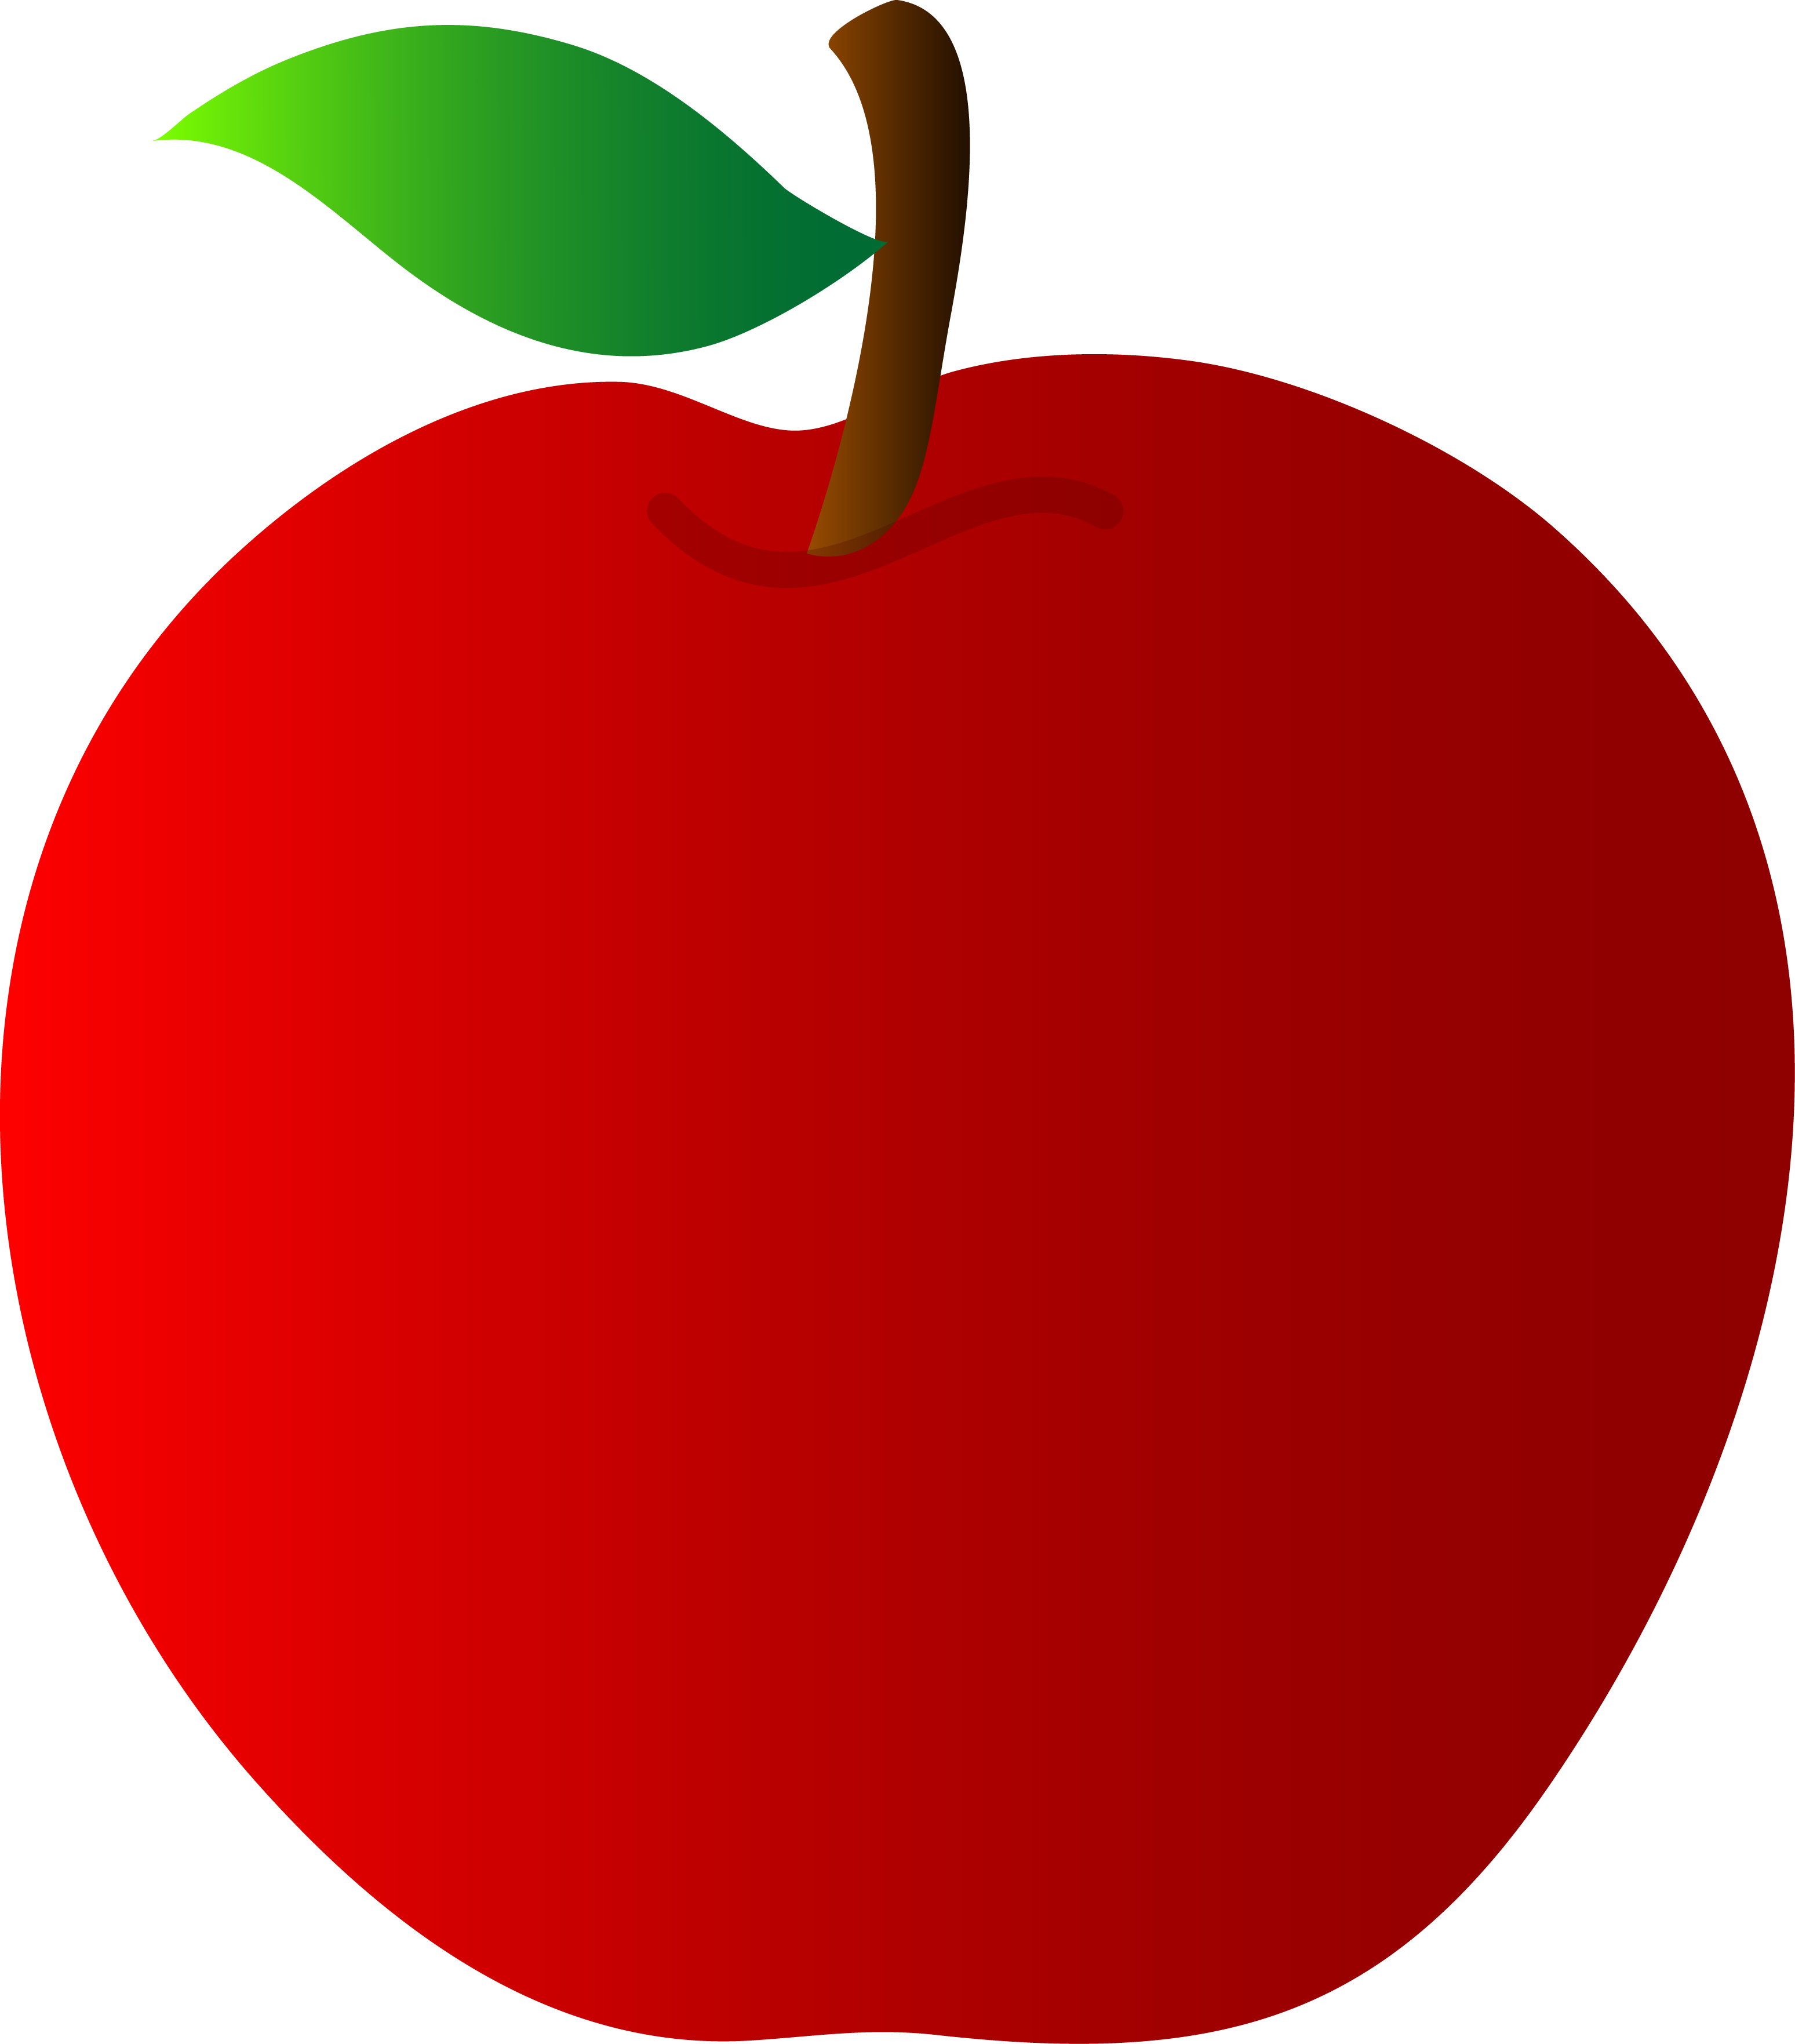 Free Cartoon Pictures Of Apples, Download Free Clip Art